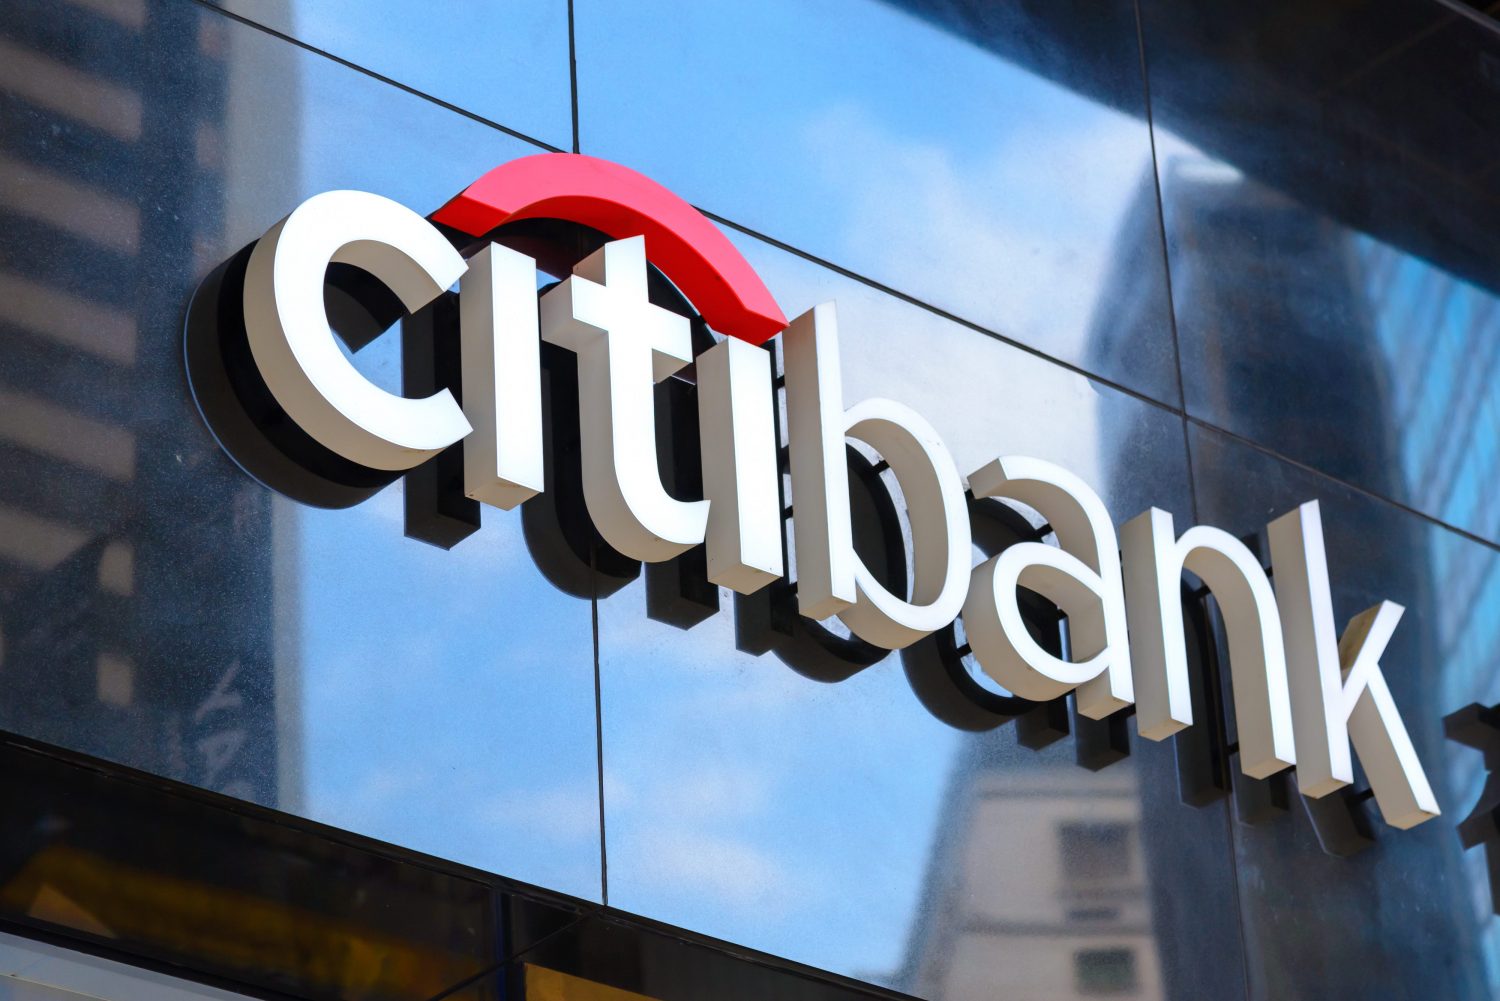 Citigroup Makes a Pioneering Entrance into the Crypto World with the Introduction of Citi Token Services